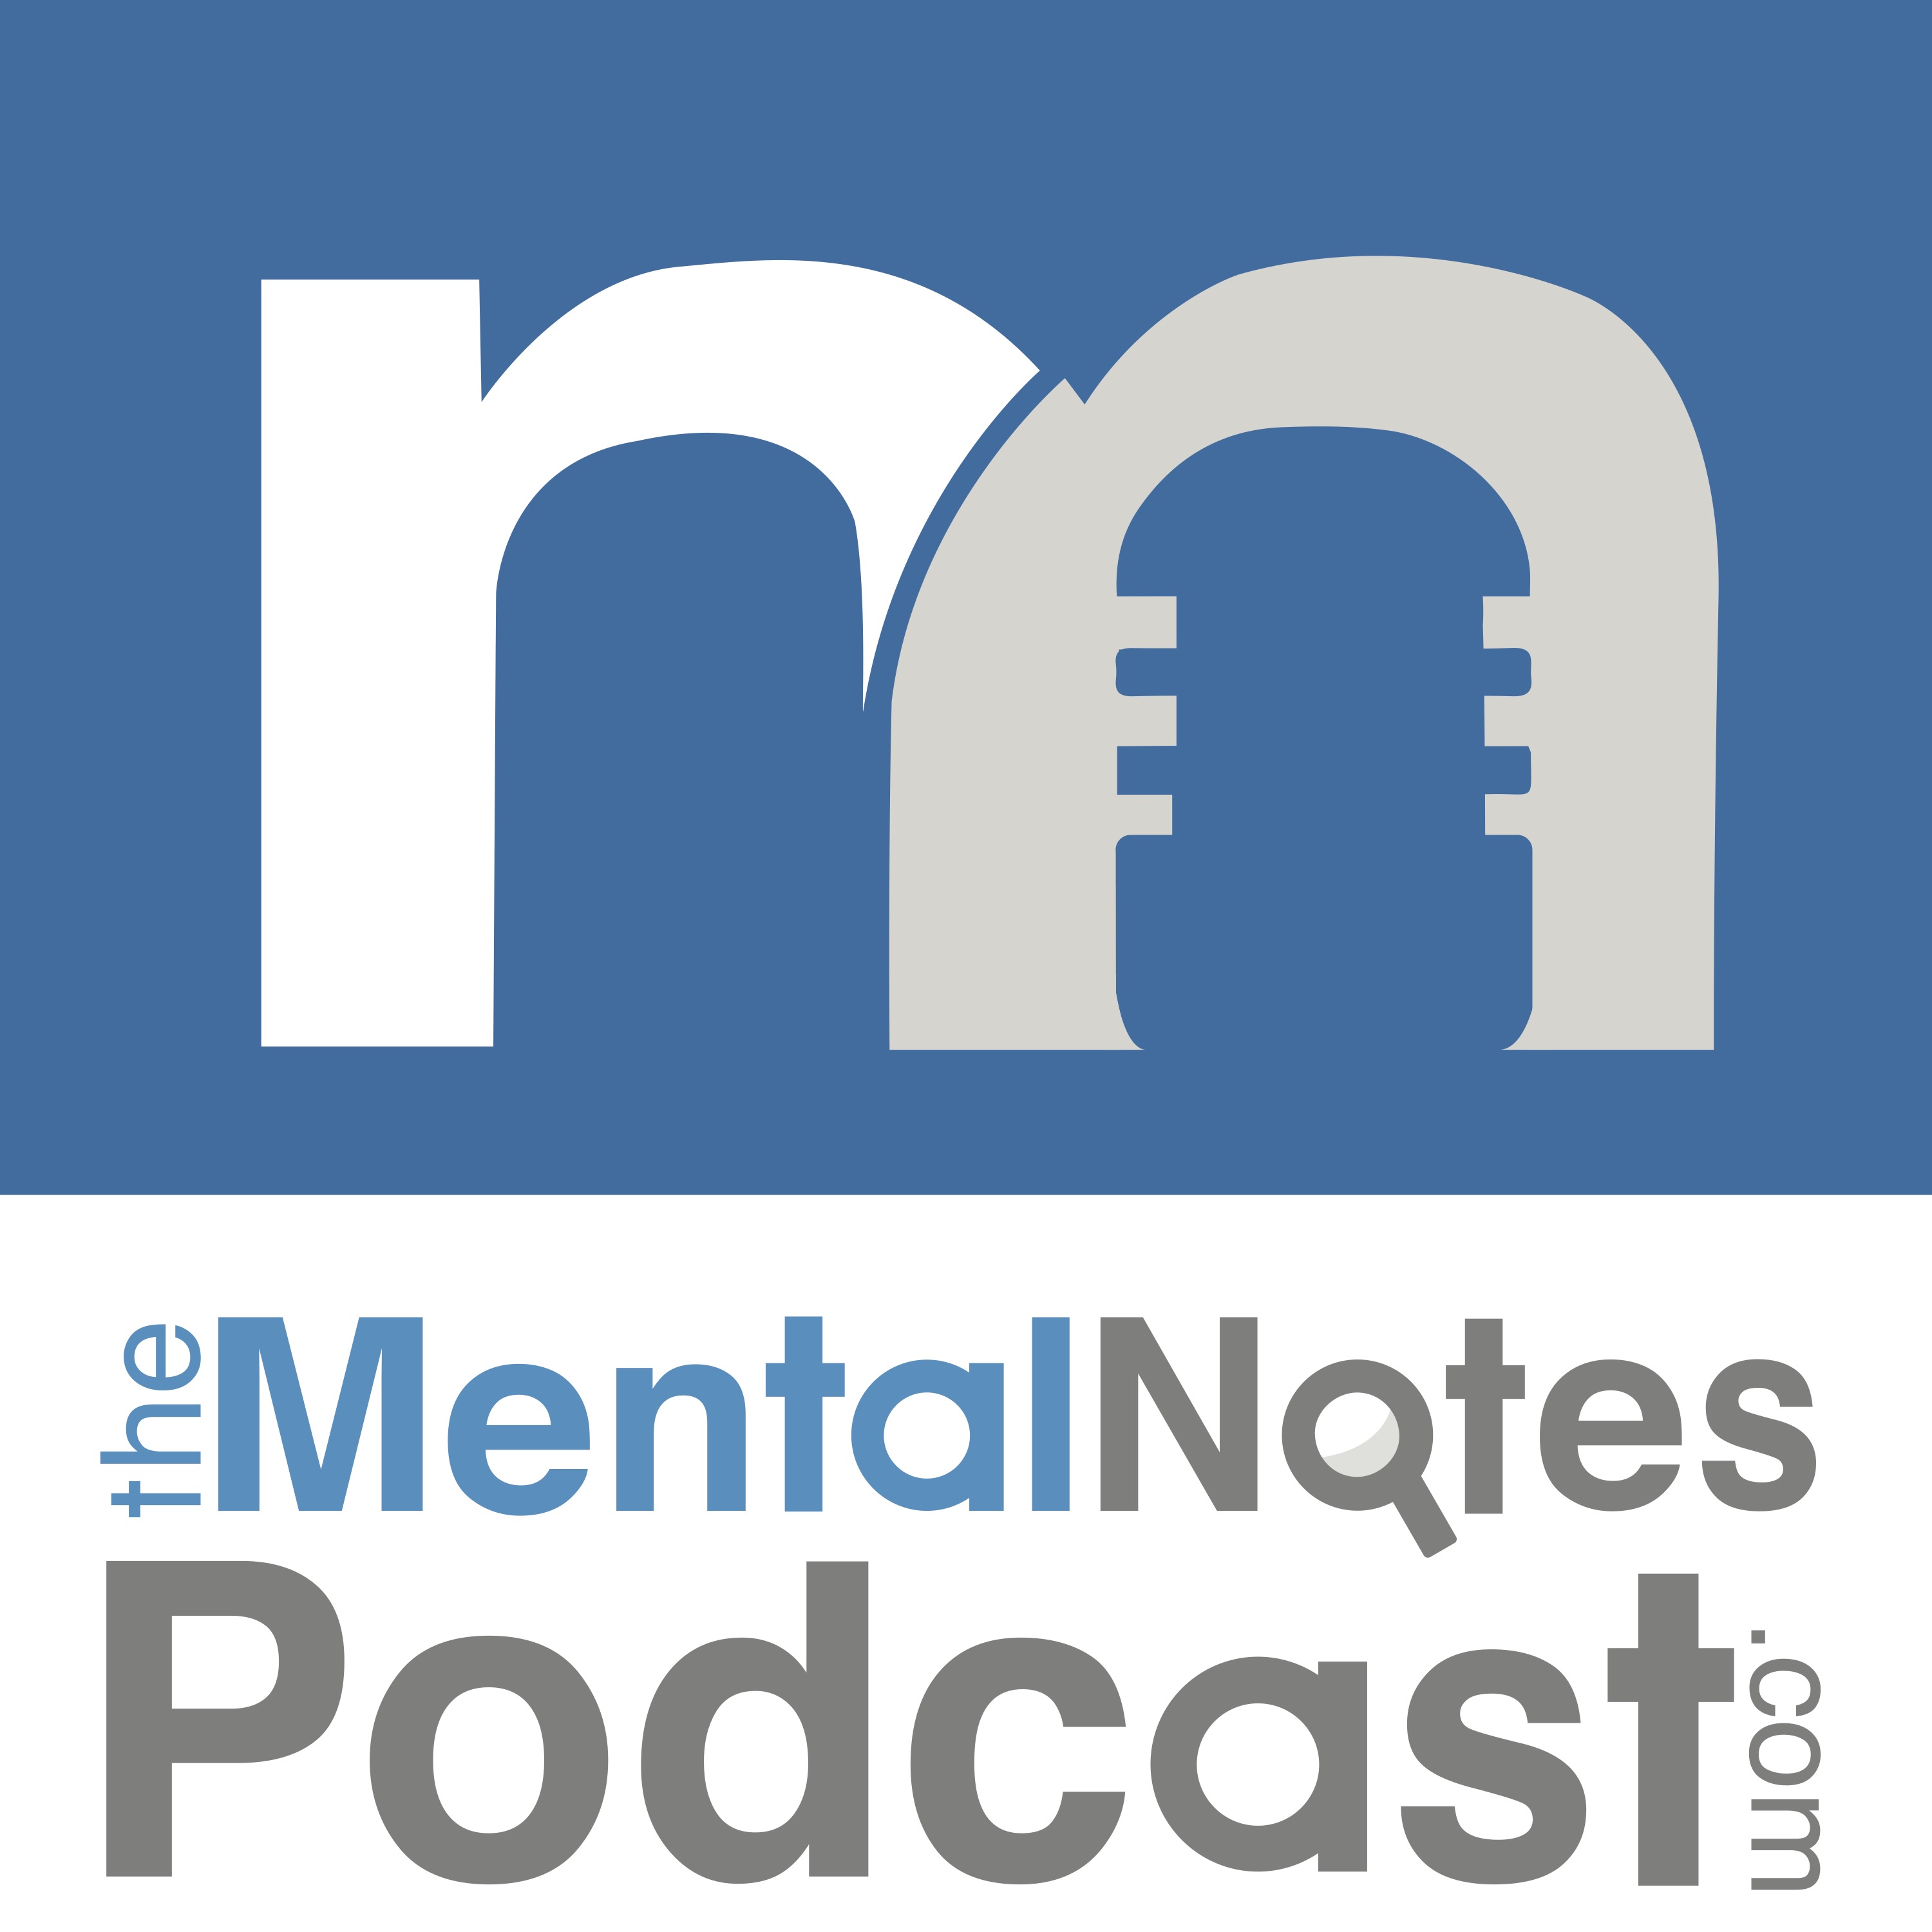 Mental Notes Logo Podcast with Microphone FINAL .com (2) (6).jpg